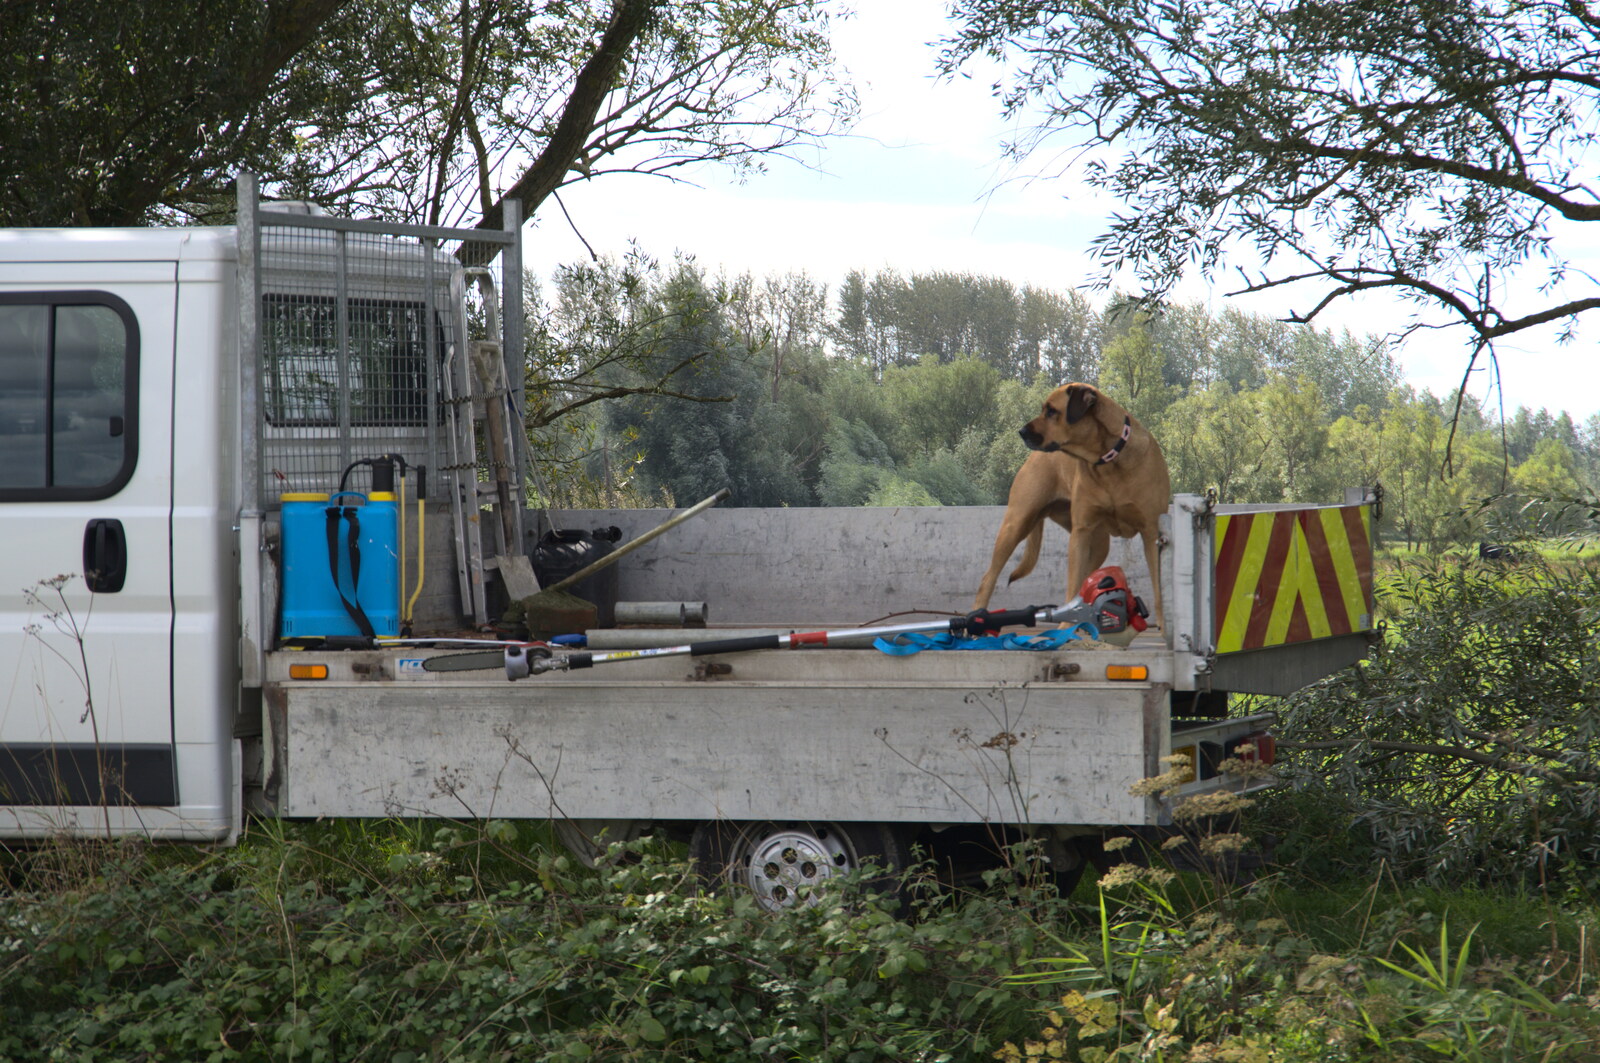 A dog stands around on the back of a van from Camping at Three Rivers, Geldeston, Norfolk - 5th September 2020